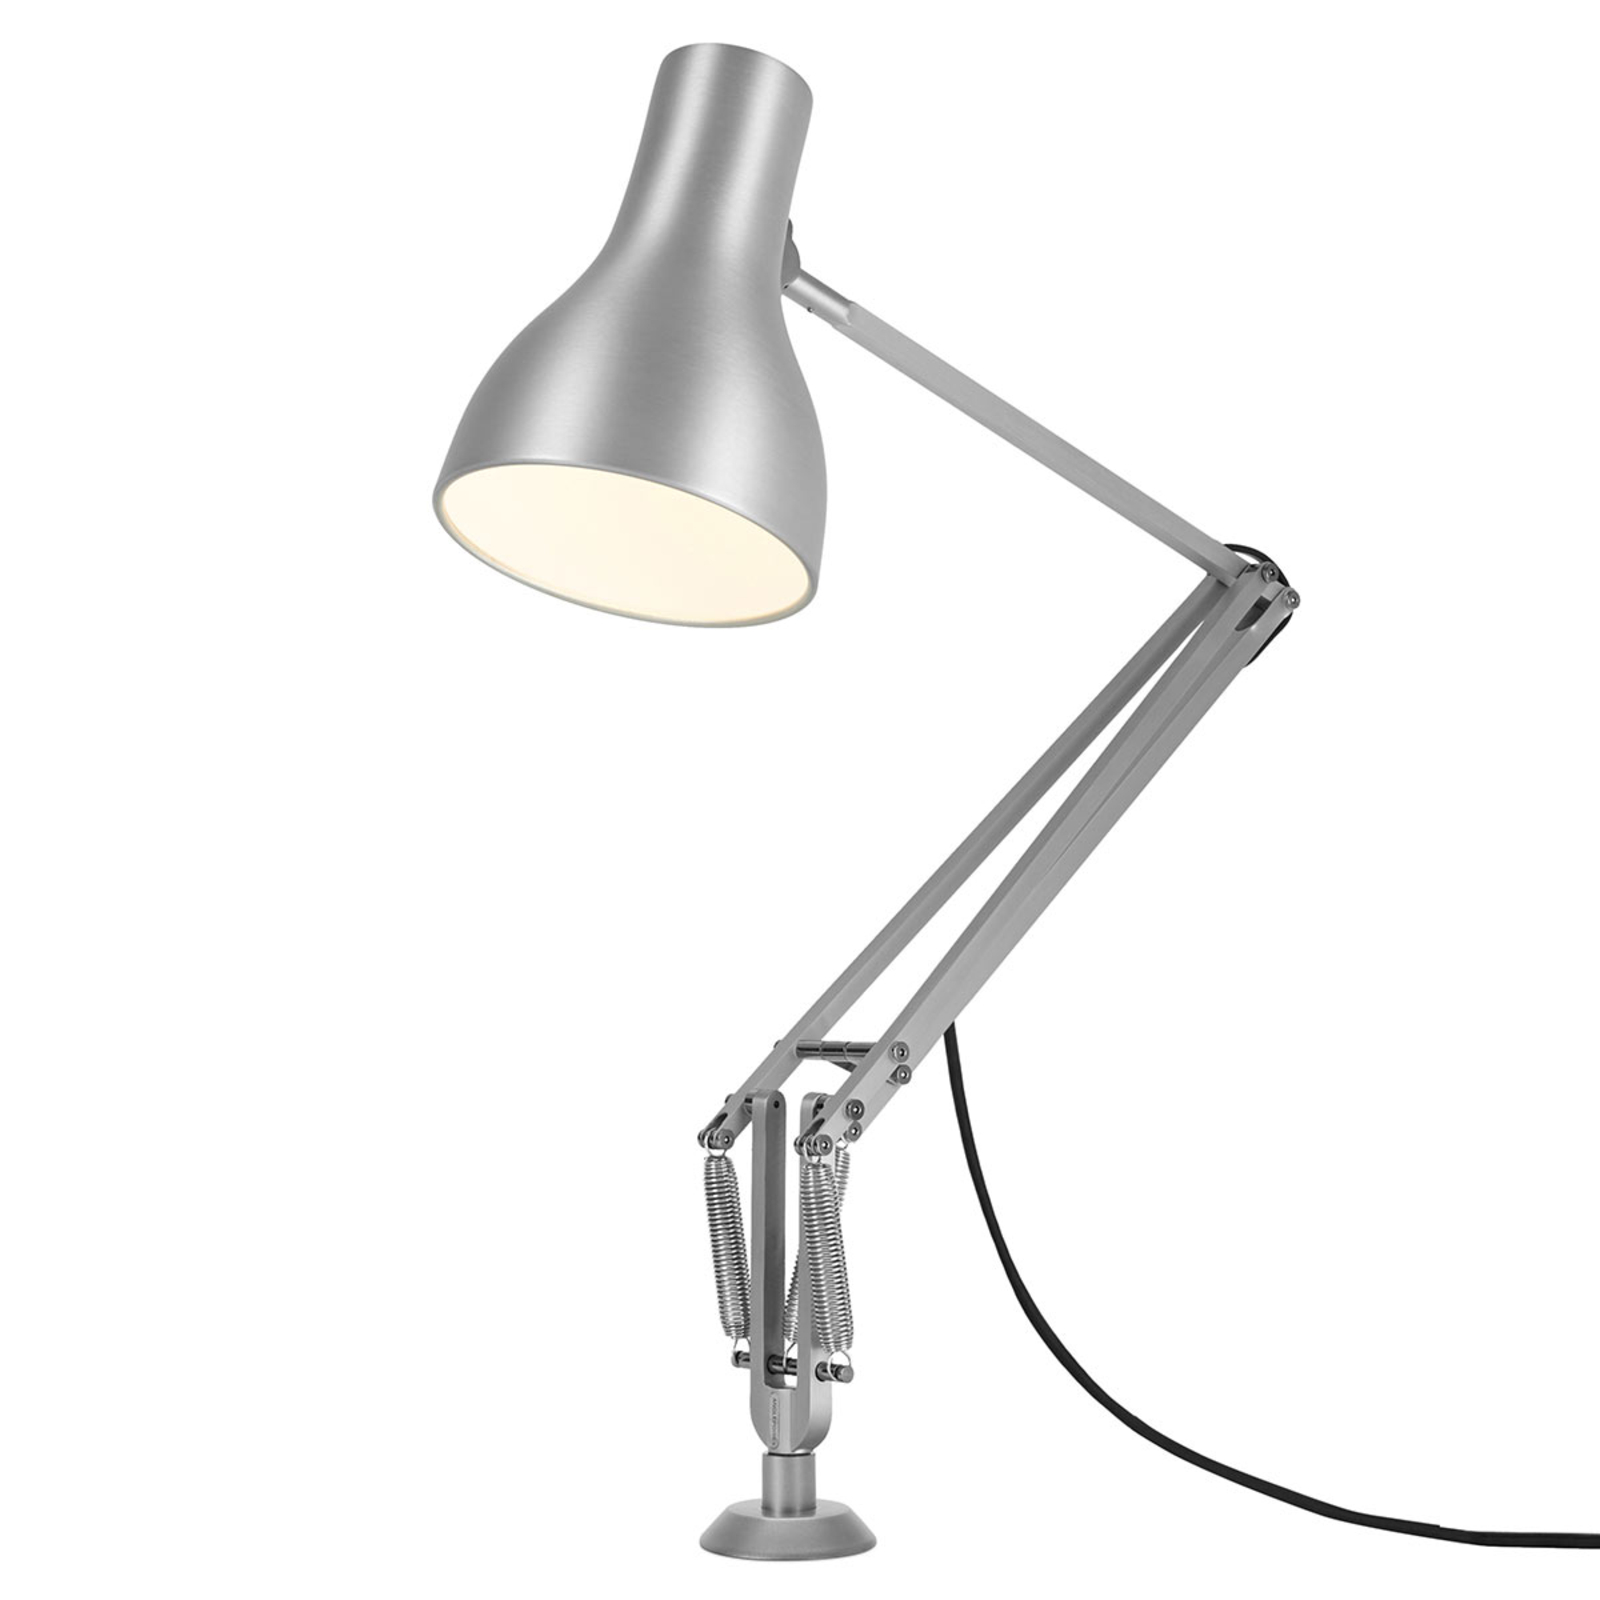 Anglepoise® Type 75 tafellamp schroefvoet zilver